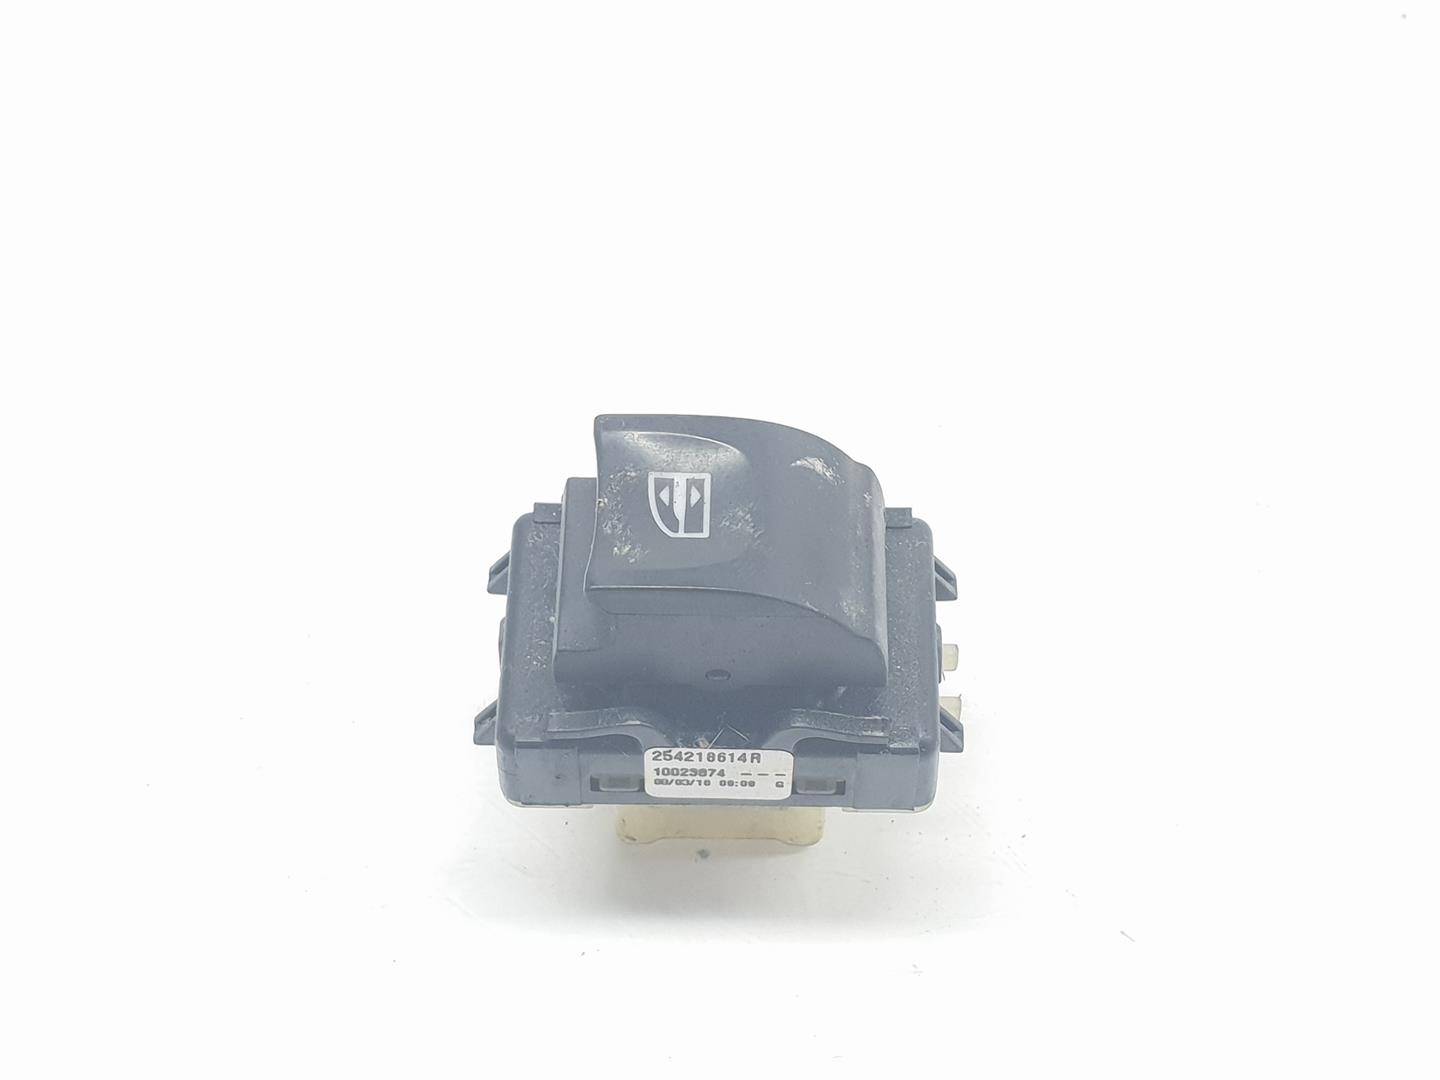 RENAULT Trafic 2 generation (2001-2015) Front Right Door Window Switch 254218614R, 254218614R 24238950